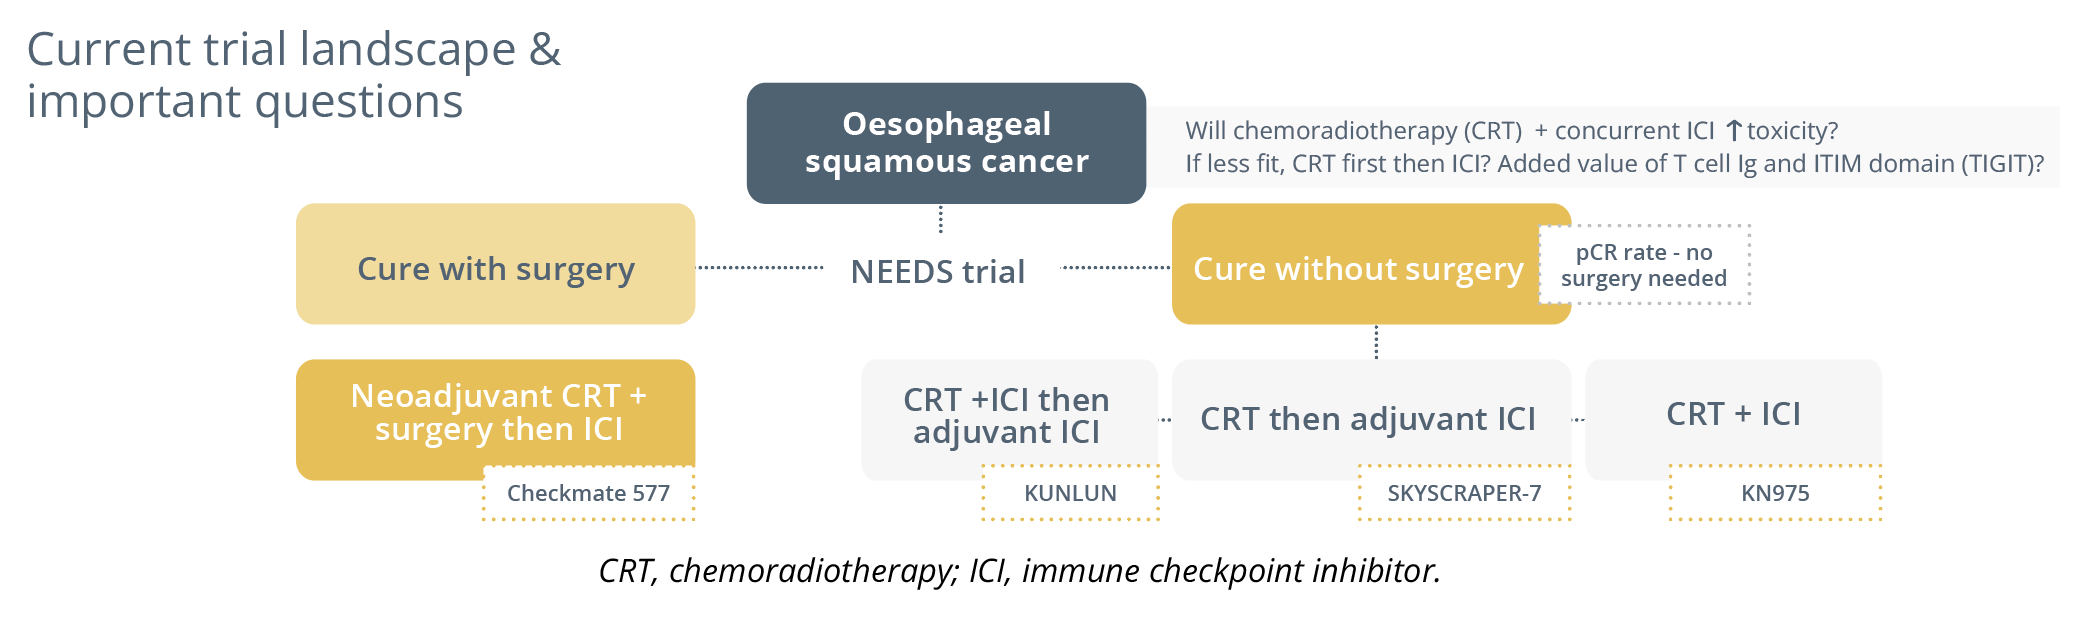 The current trial landscape for oesophageal squamous cancer patients, including surgical and non-surgical approaches.